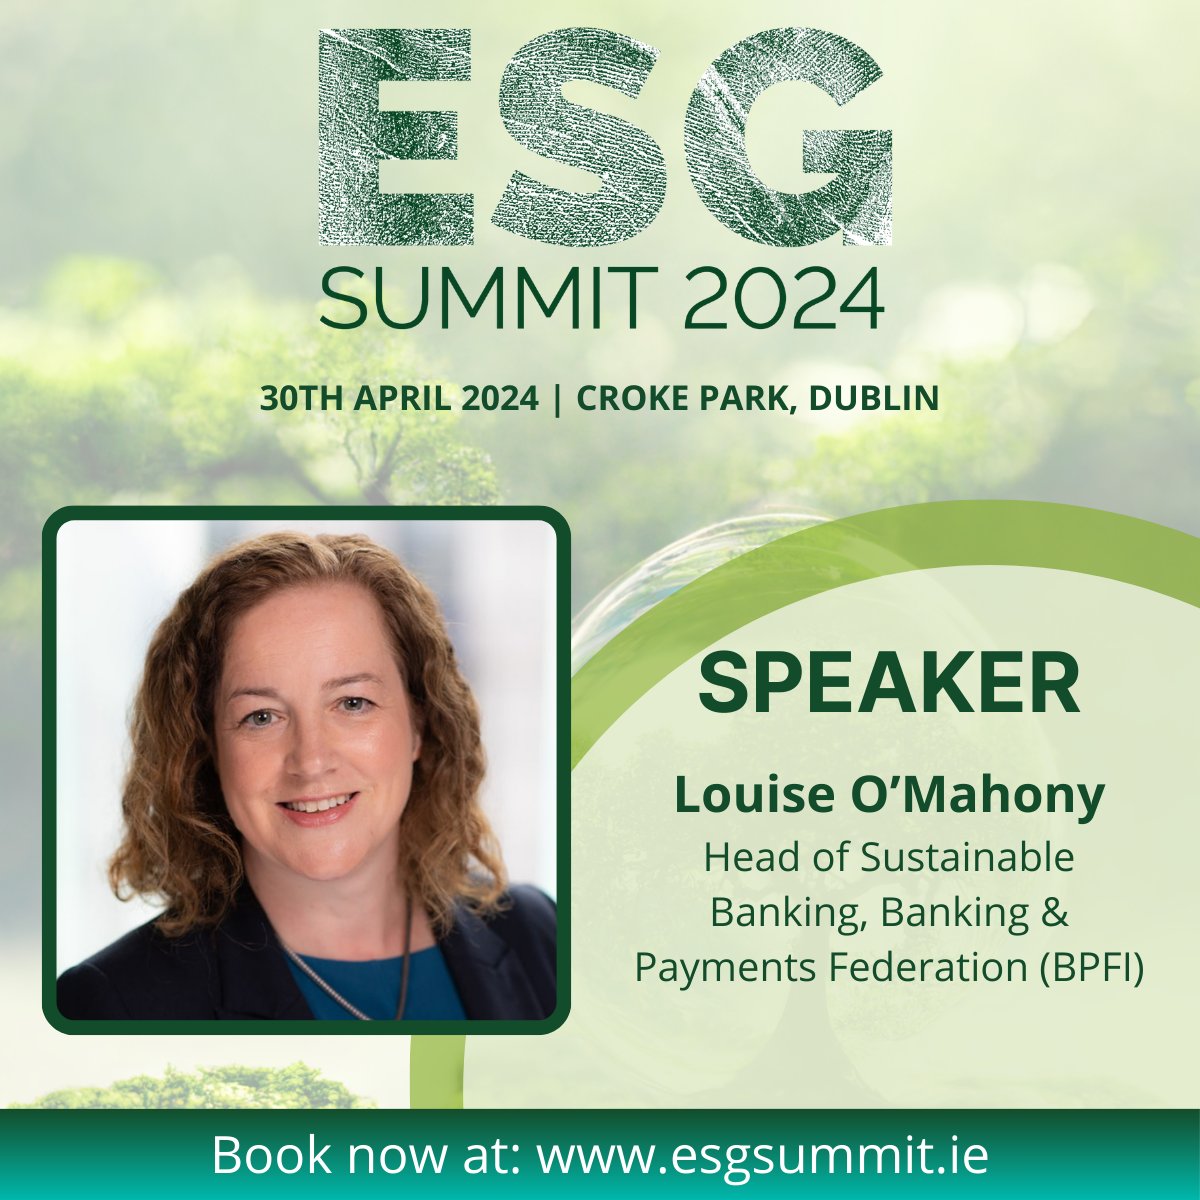 BPFI’s Head of Sustainable Banking Louise O’Mahony will speak on the Turning ambition into action on delivering net zero panel today @ESGSummit @CrokePark. #ESGSummit24